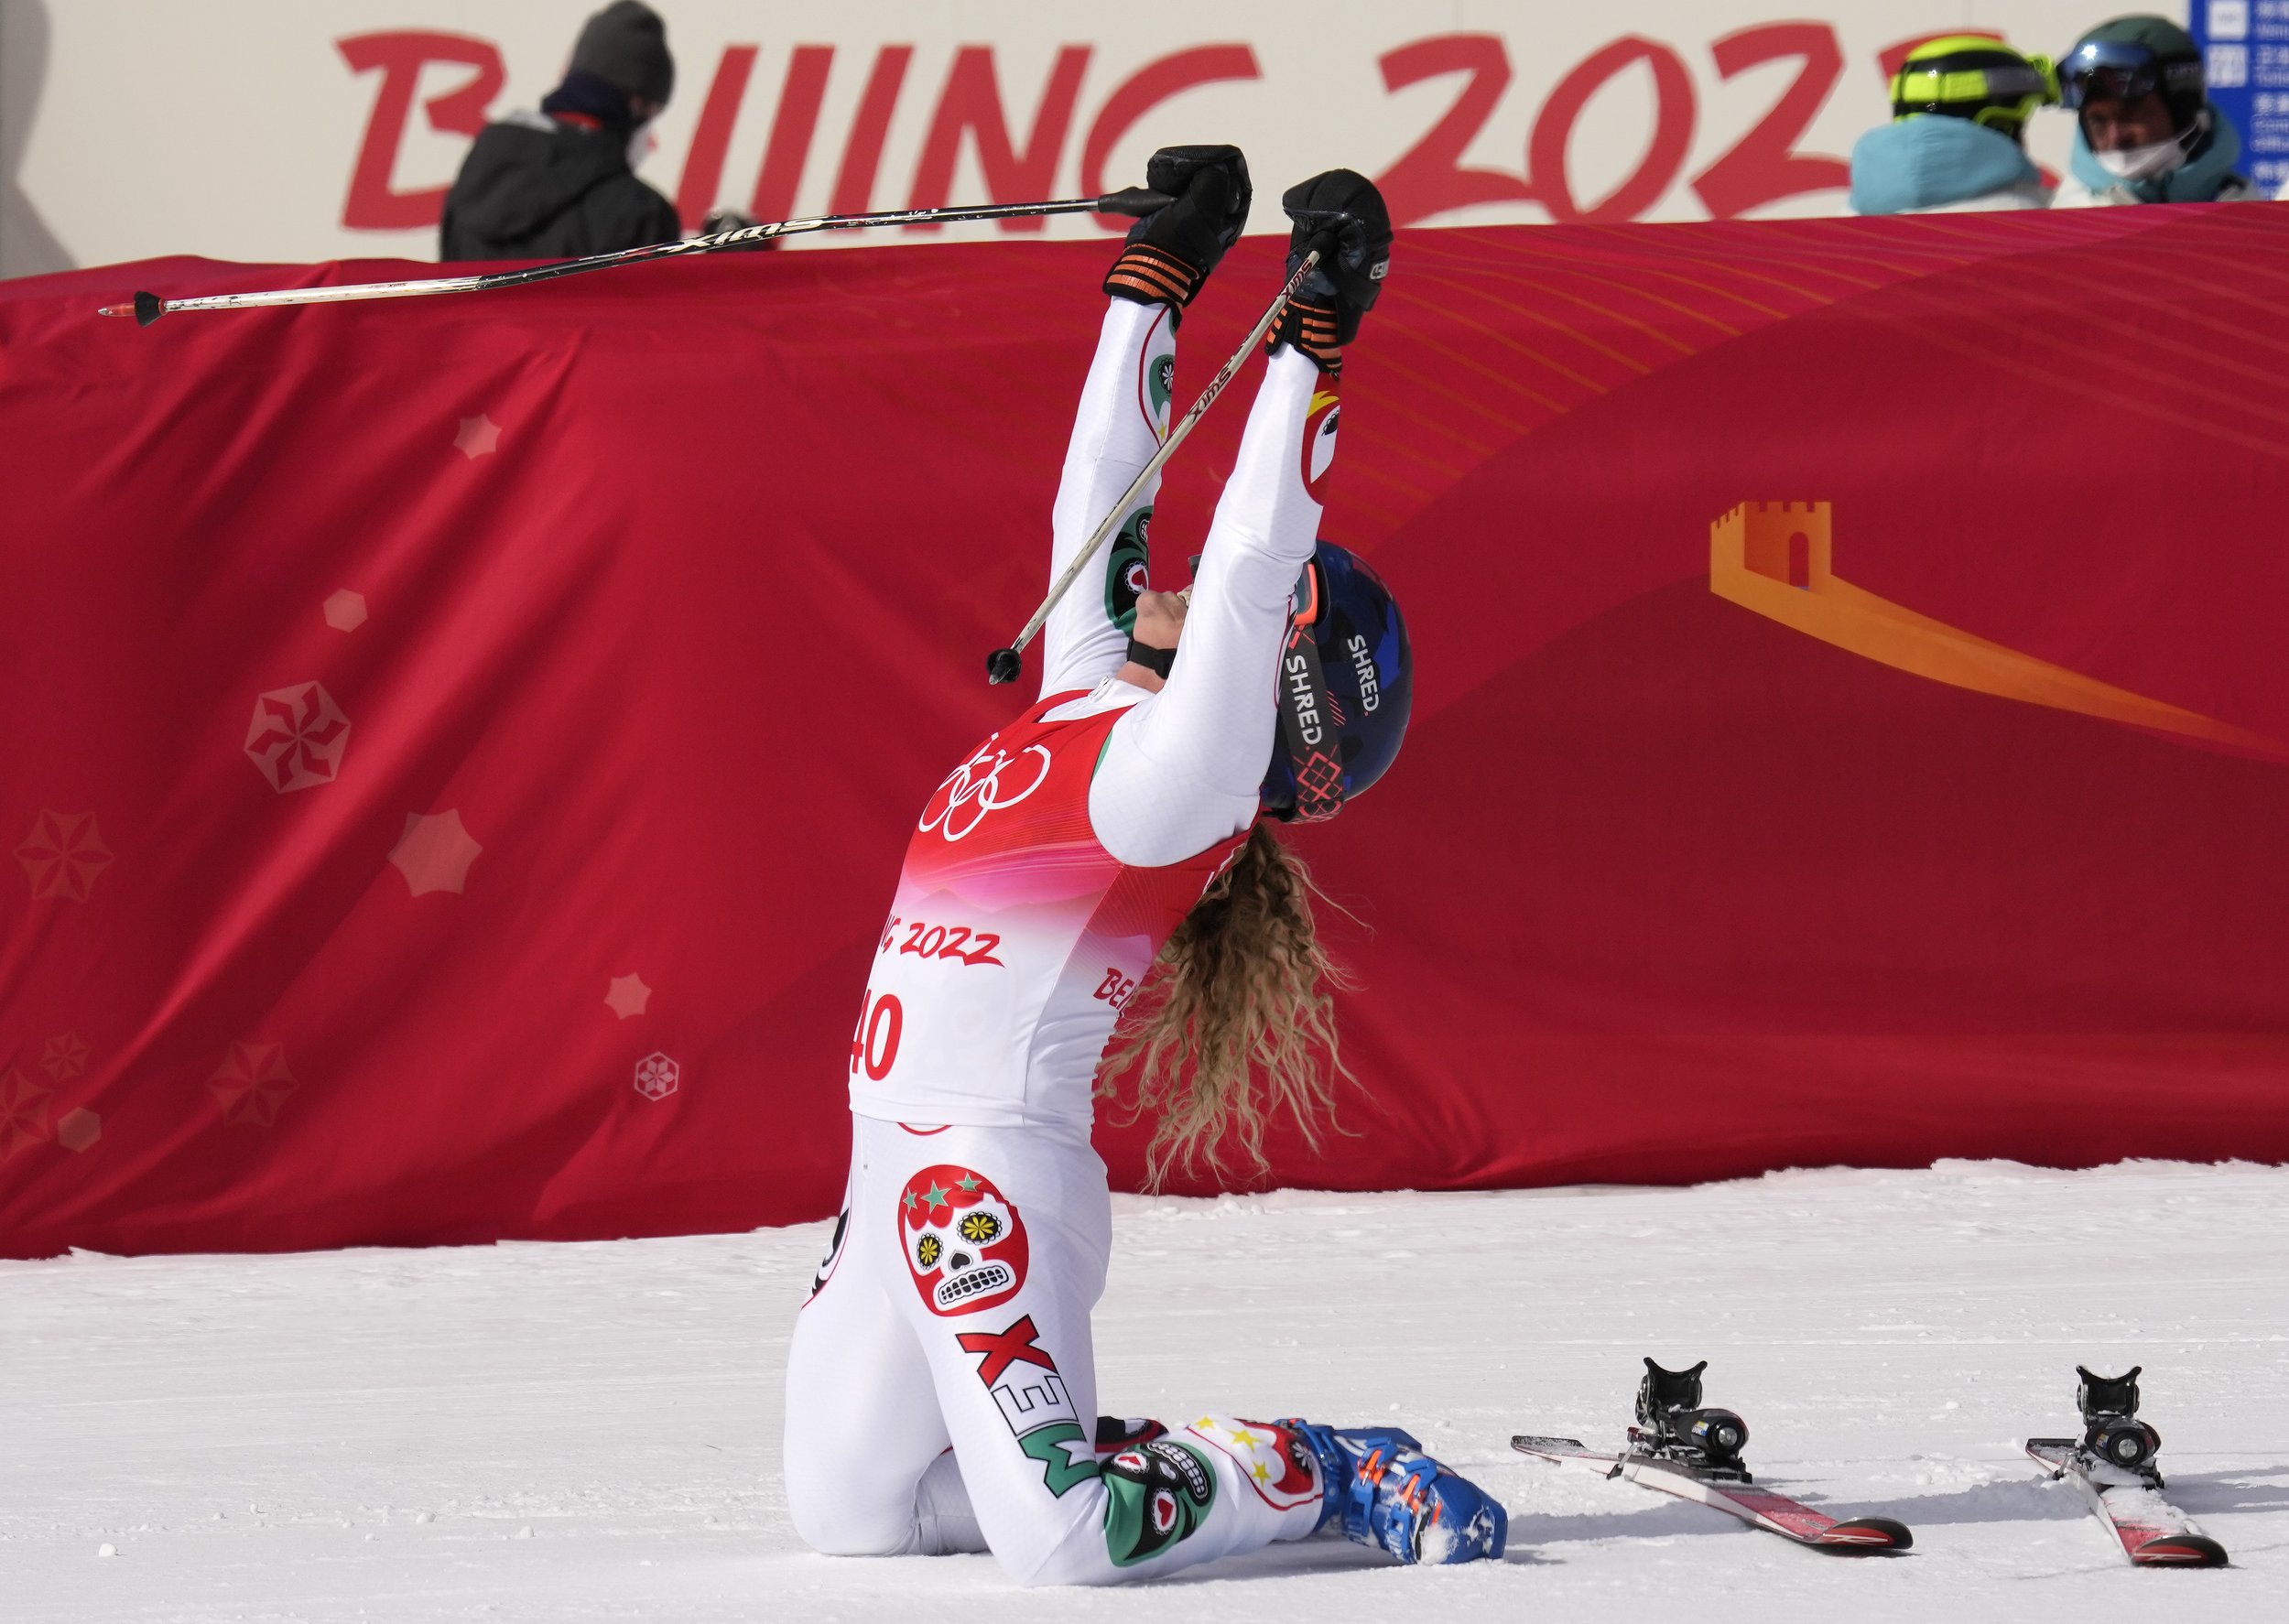  Sarah Schleper, of Mexico reacts after finishing the women's super-G at the 2022 Winter Olympics, Friday, Feb. 11, 2022, in the Yanqing district of Beijing. (AP Photo/Luca Bruno) 